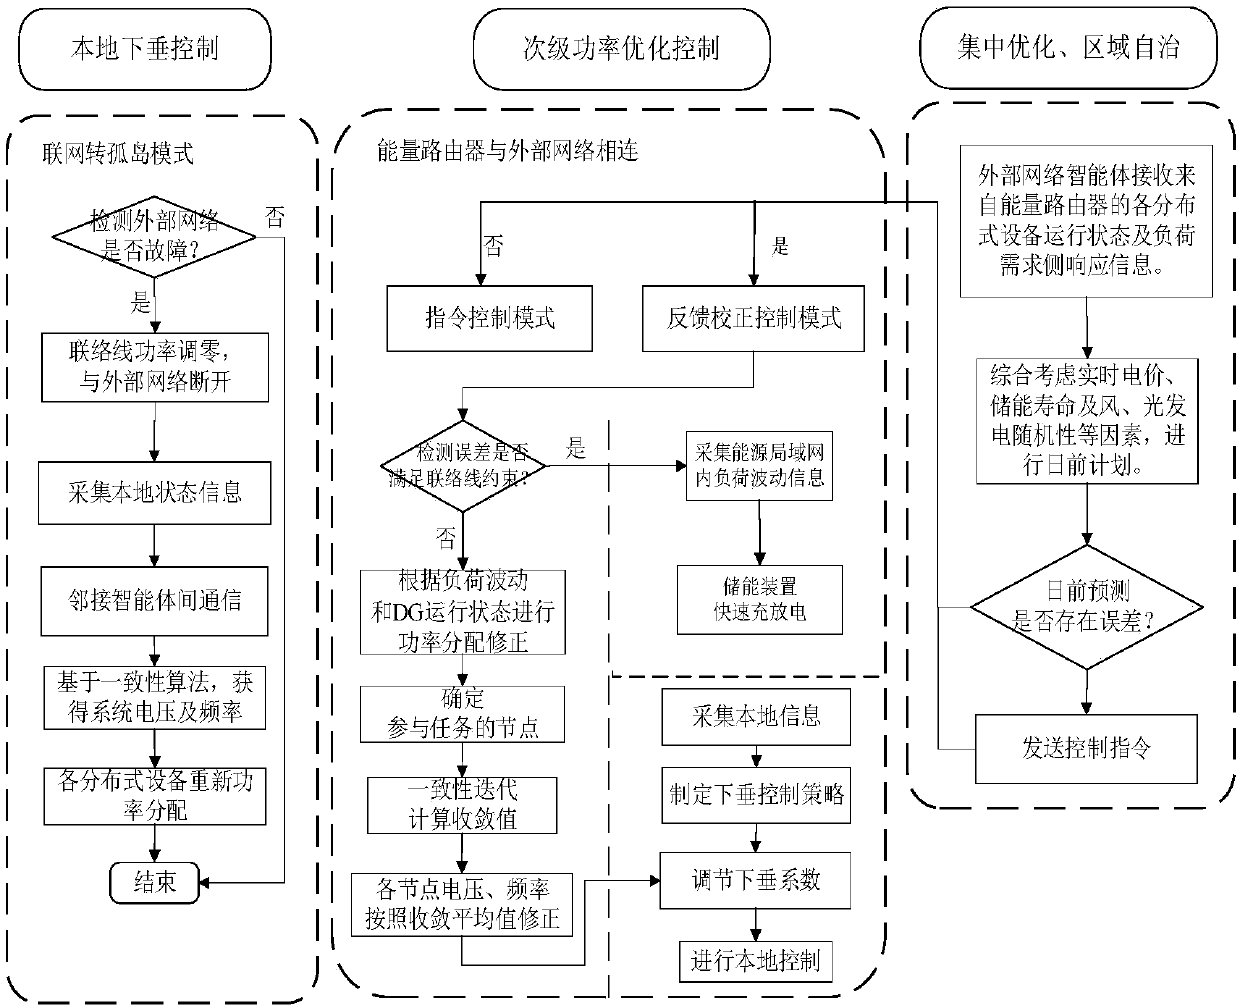 Energy local area network distributed cooperative control method based on multi-intelligent-agent system